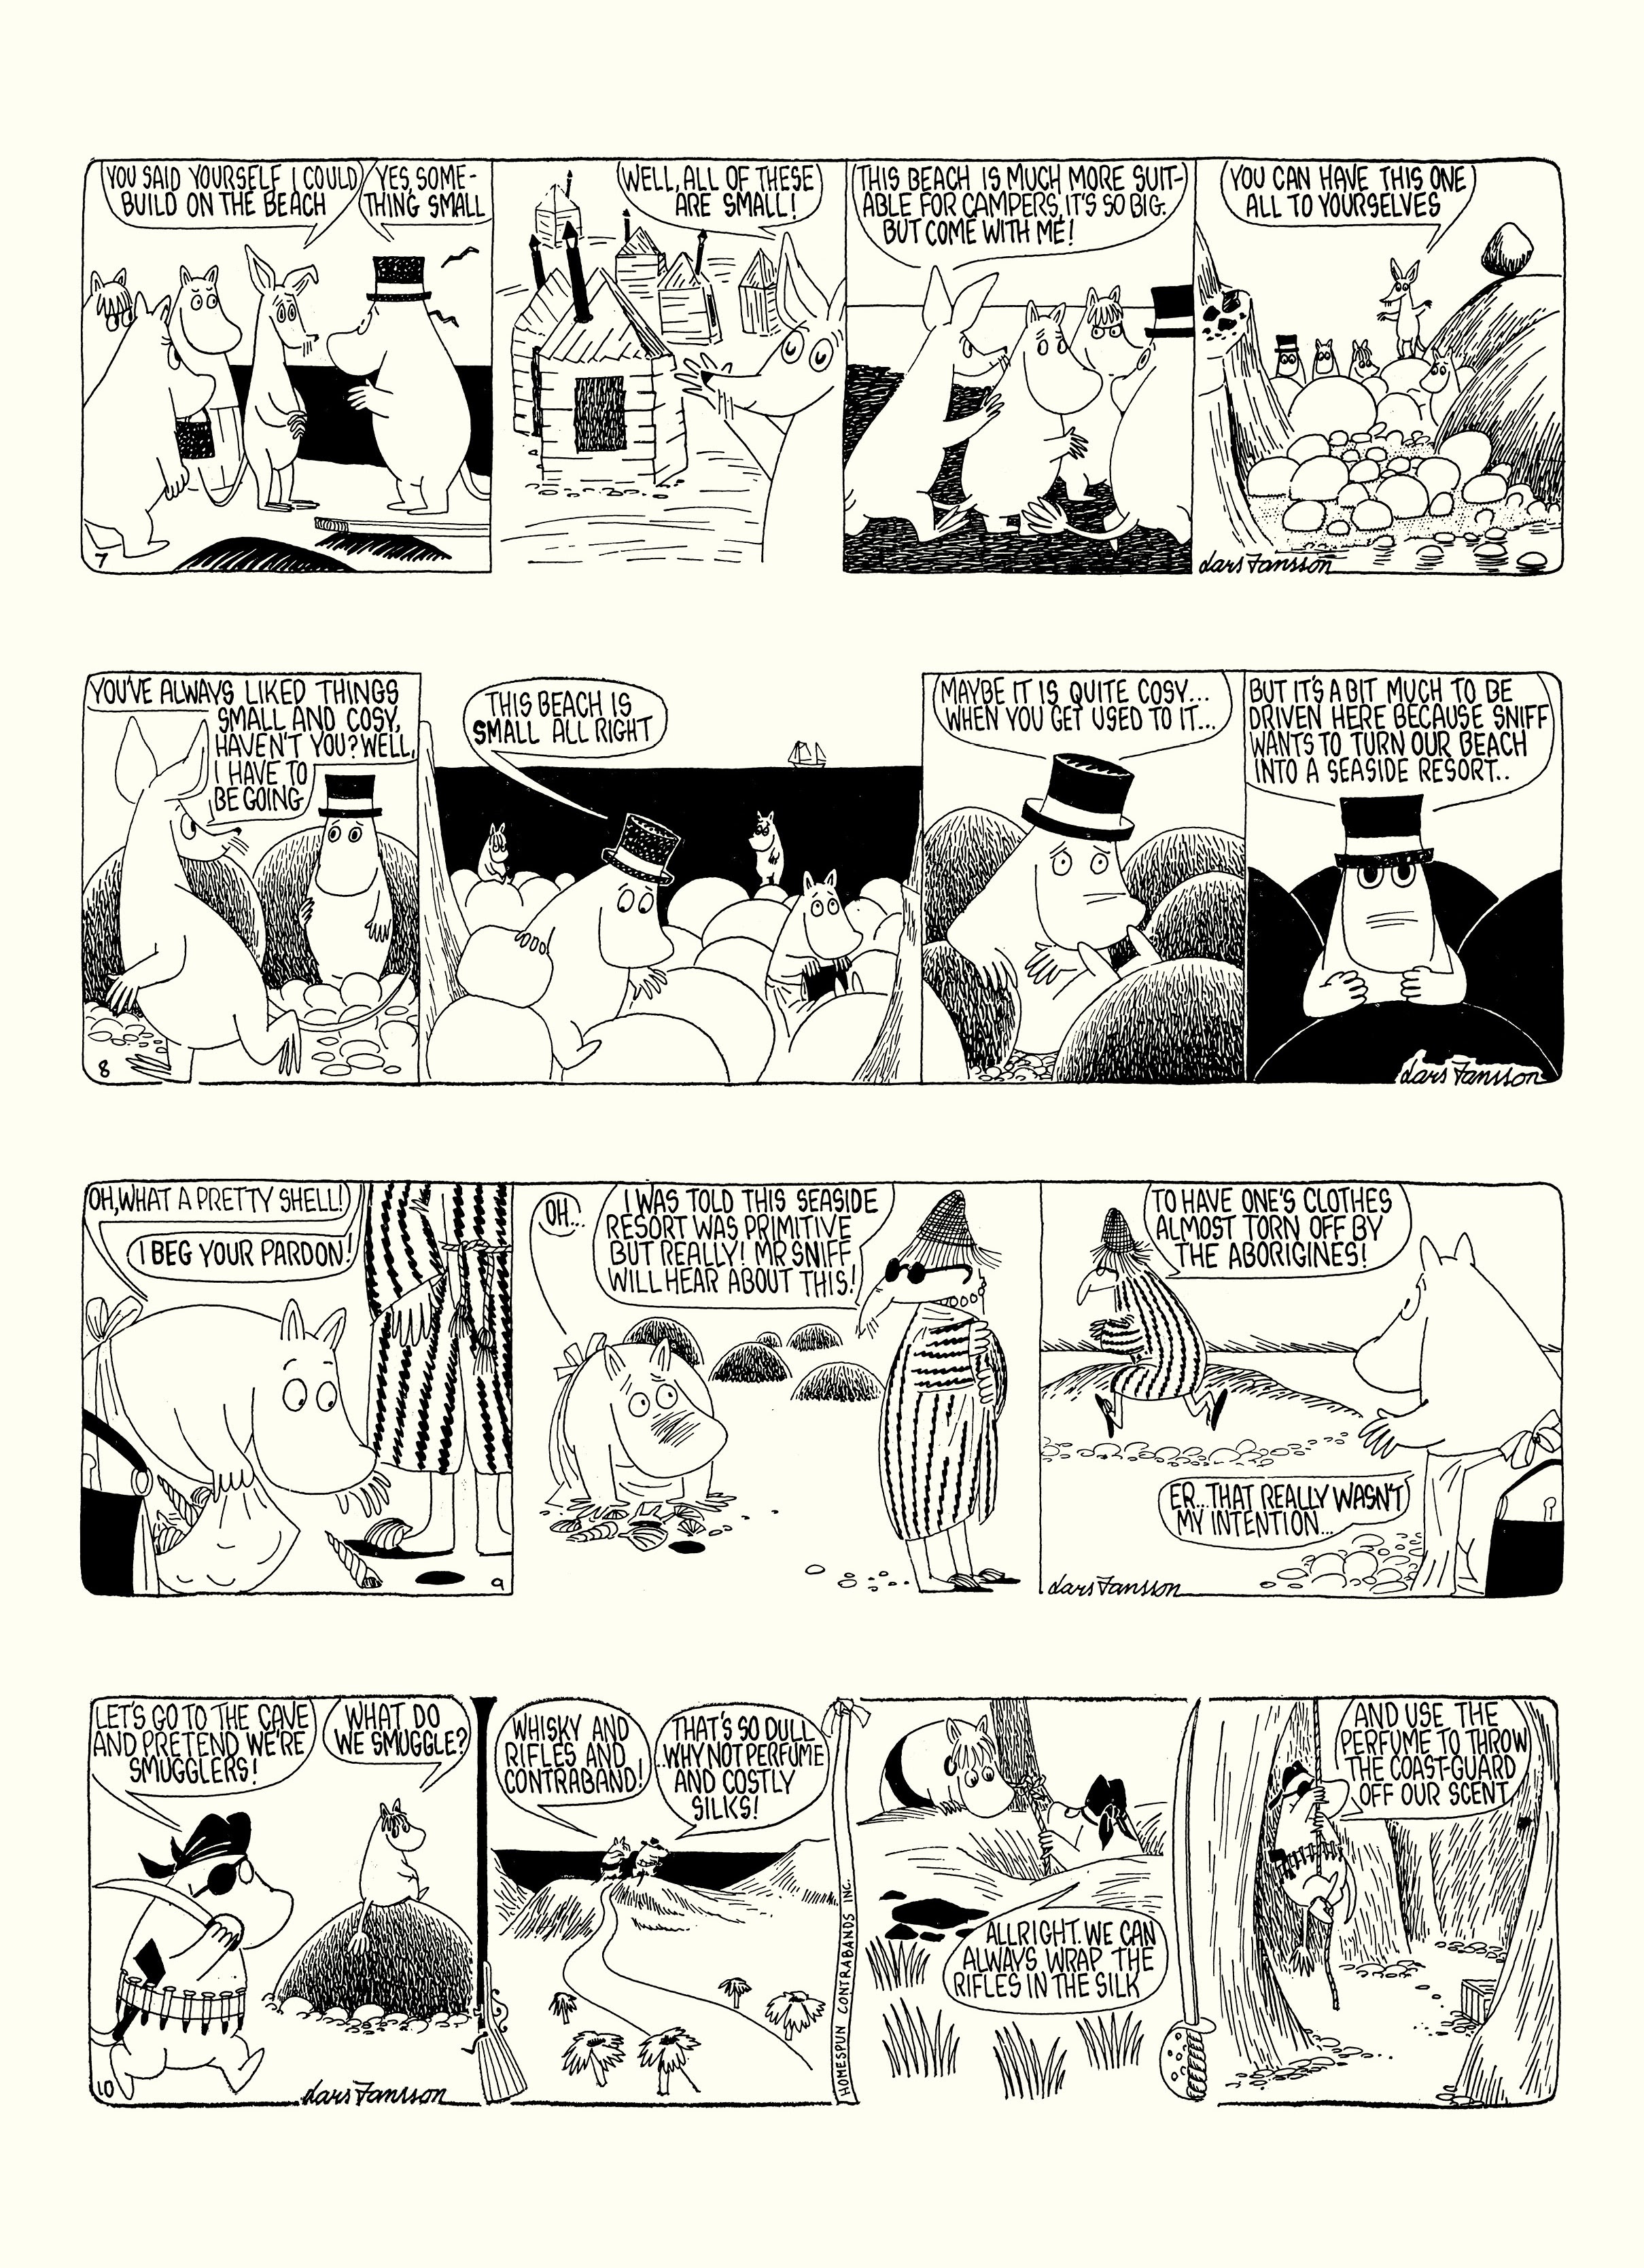 Read online Moomin: The Complete Lars Jansson Comic Strip comic -  Issue # TPB 8 - 53